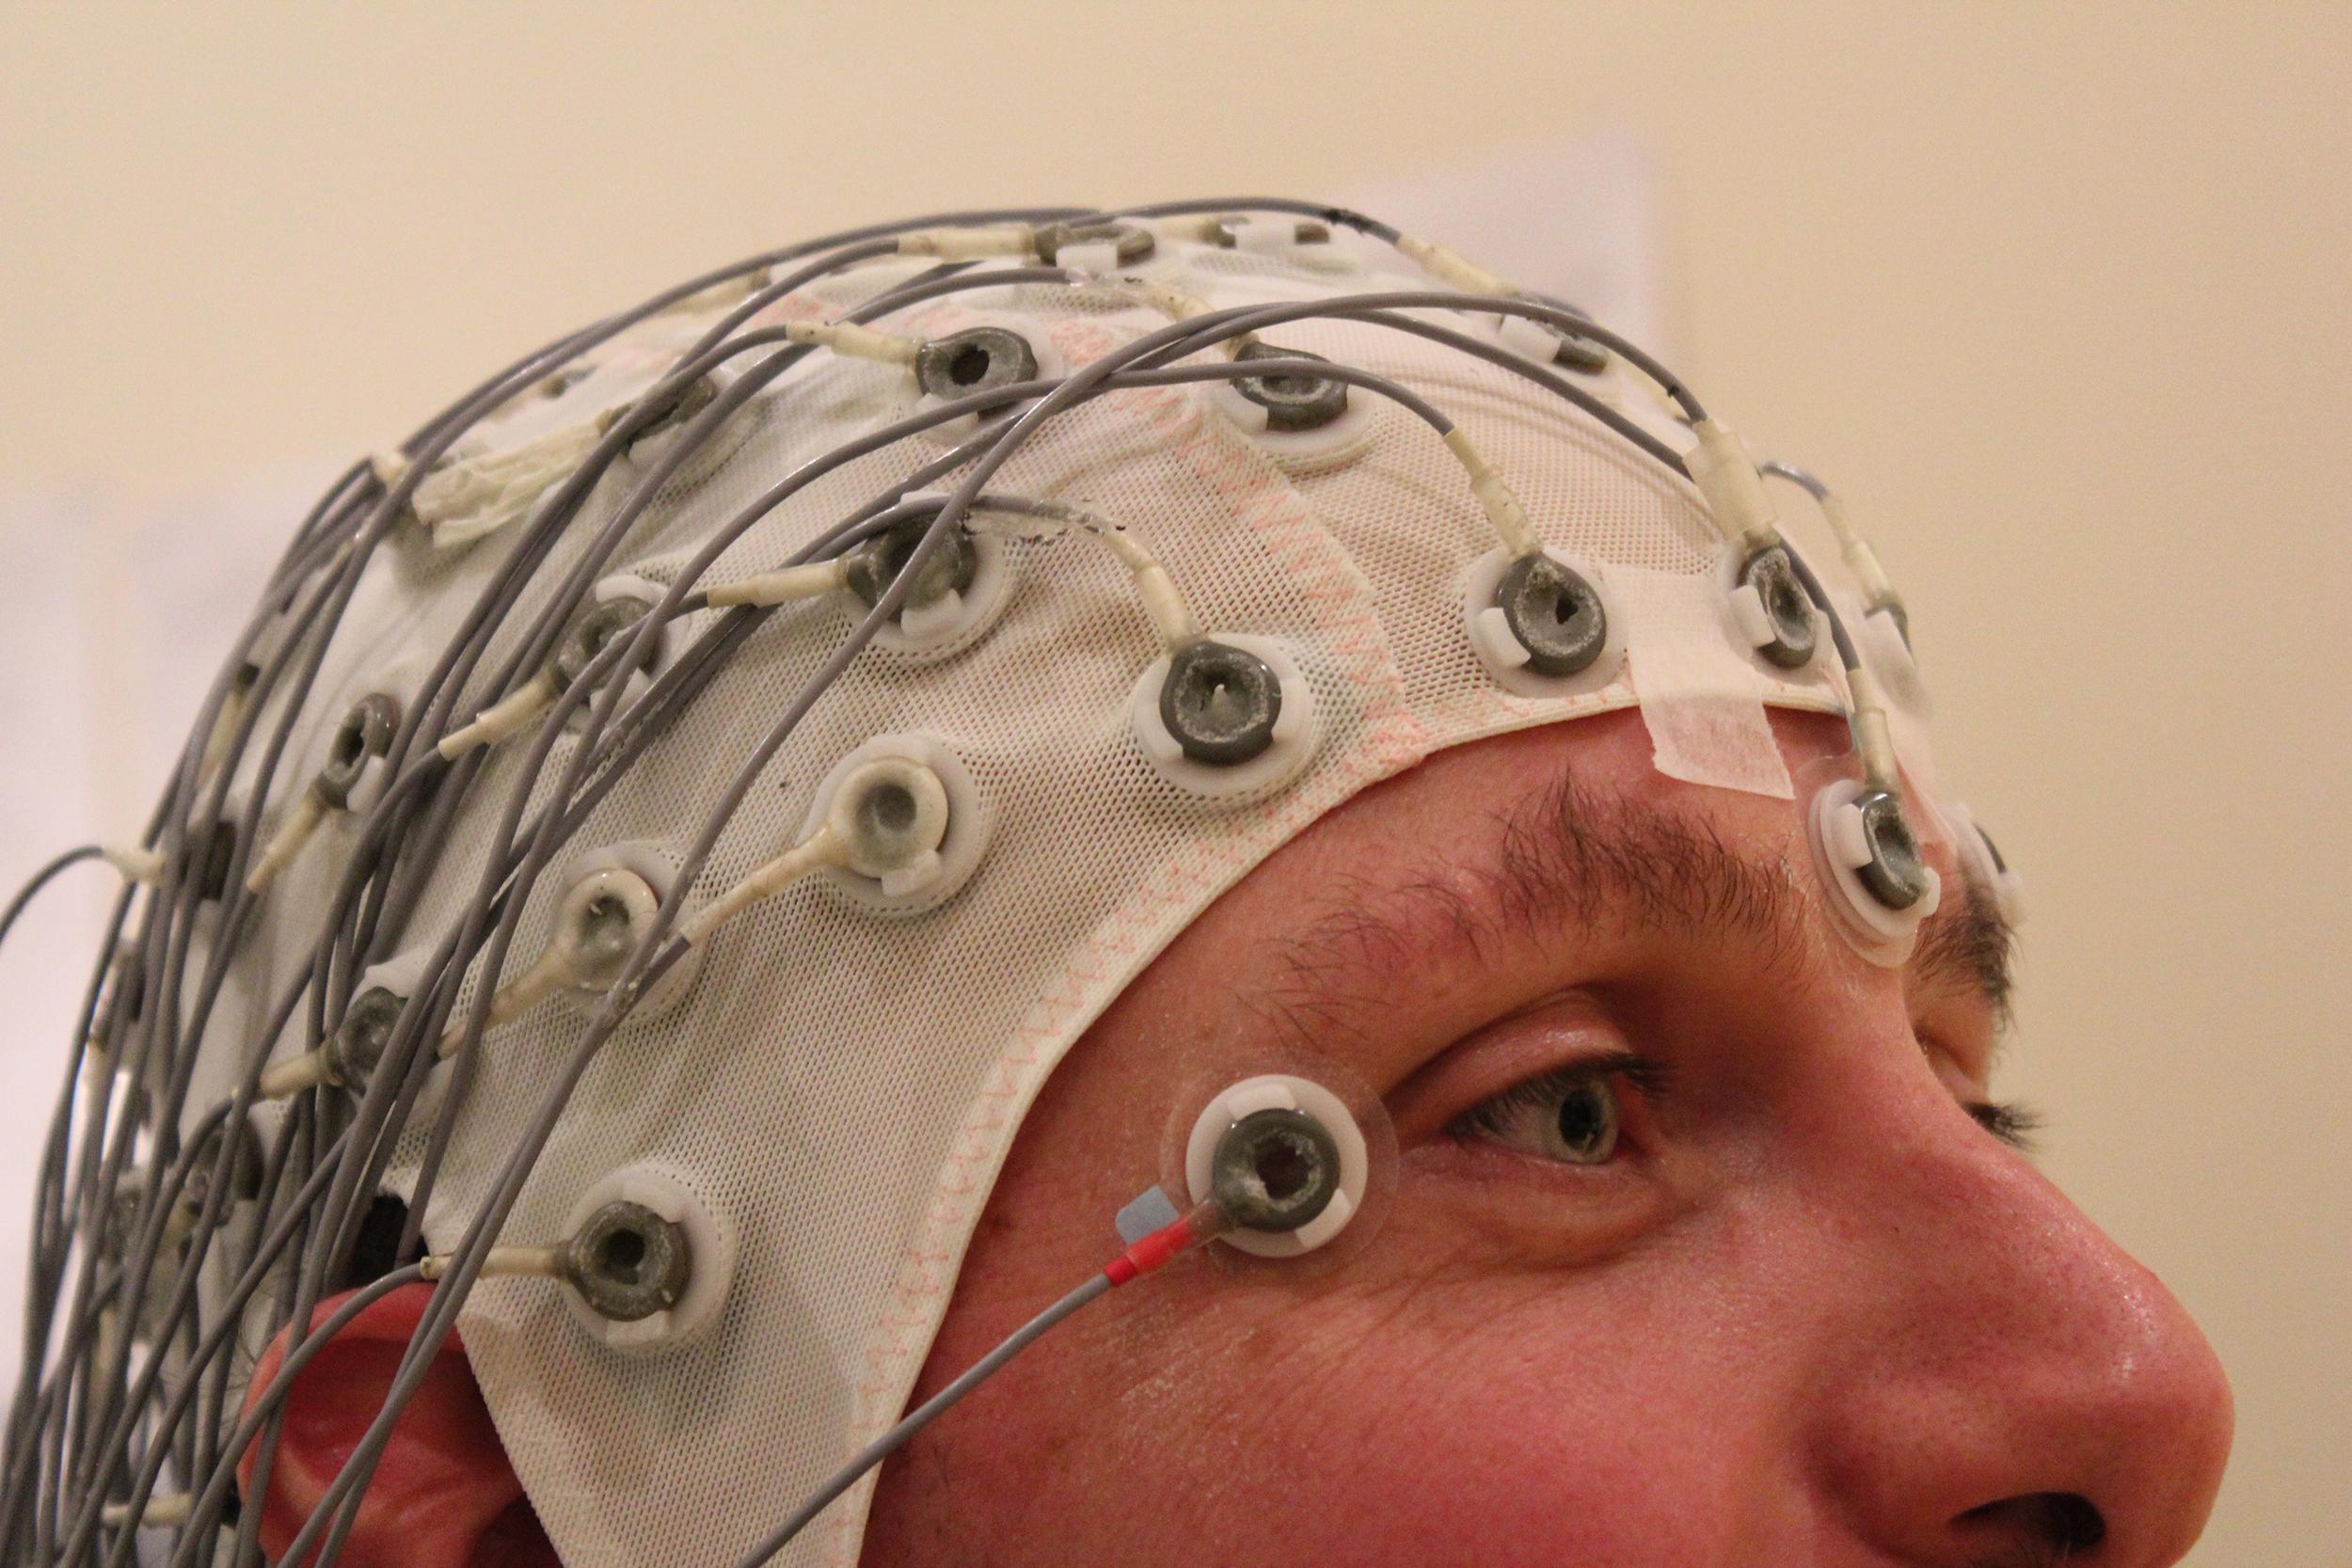 EEG scans measure the bursts of electric activity in the deepest part of our brains (Flickr)